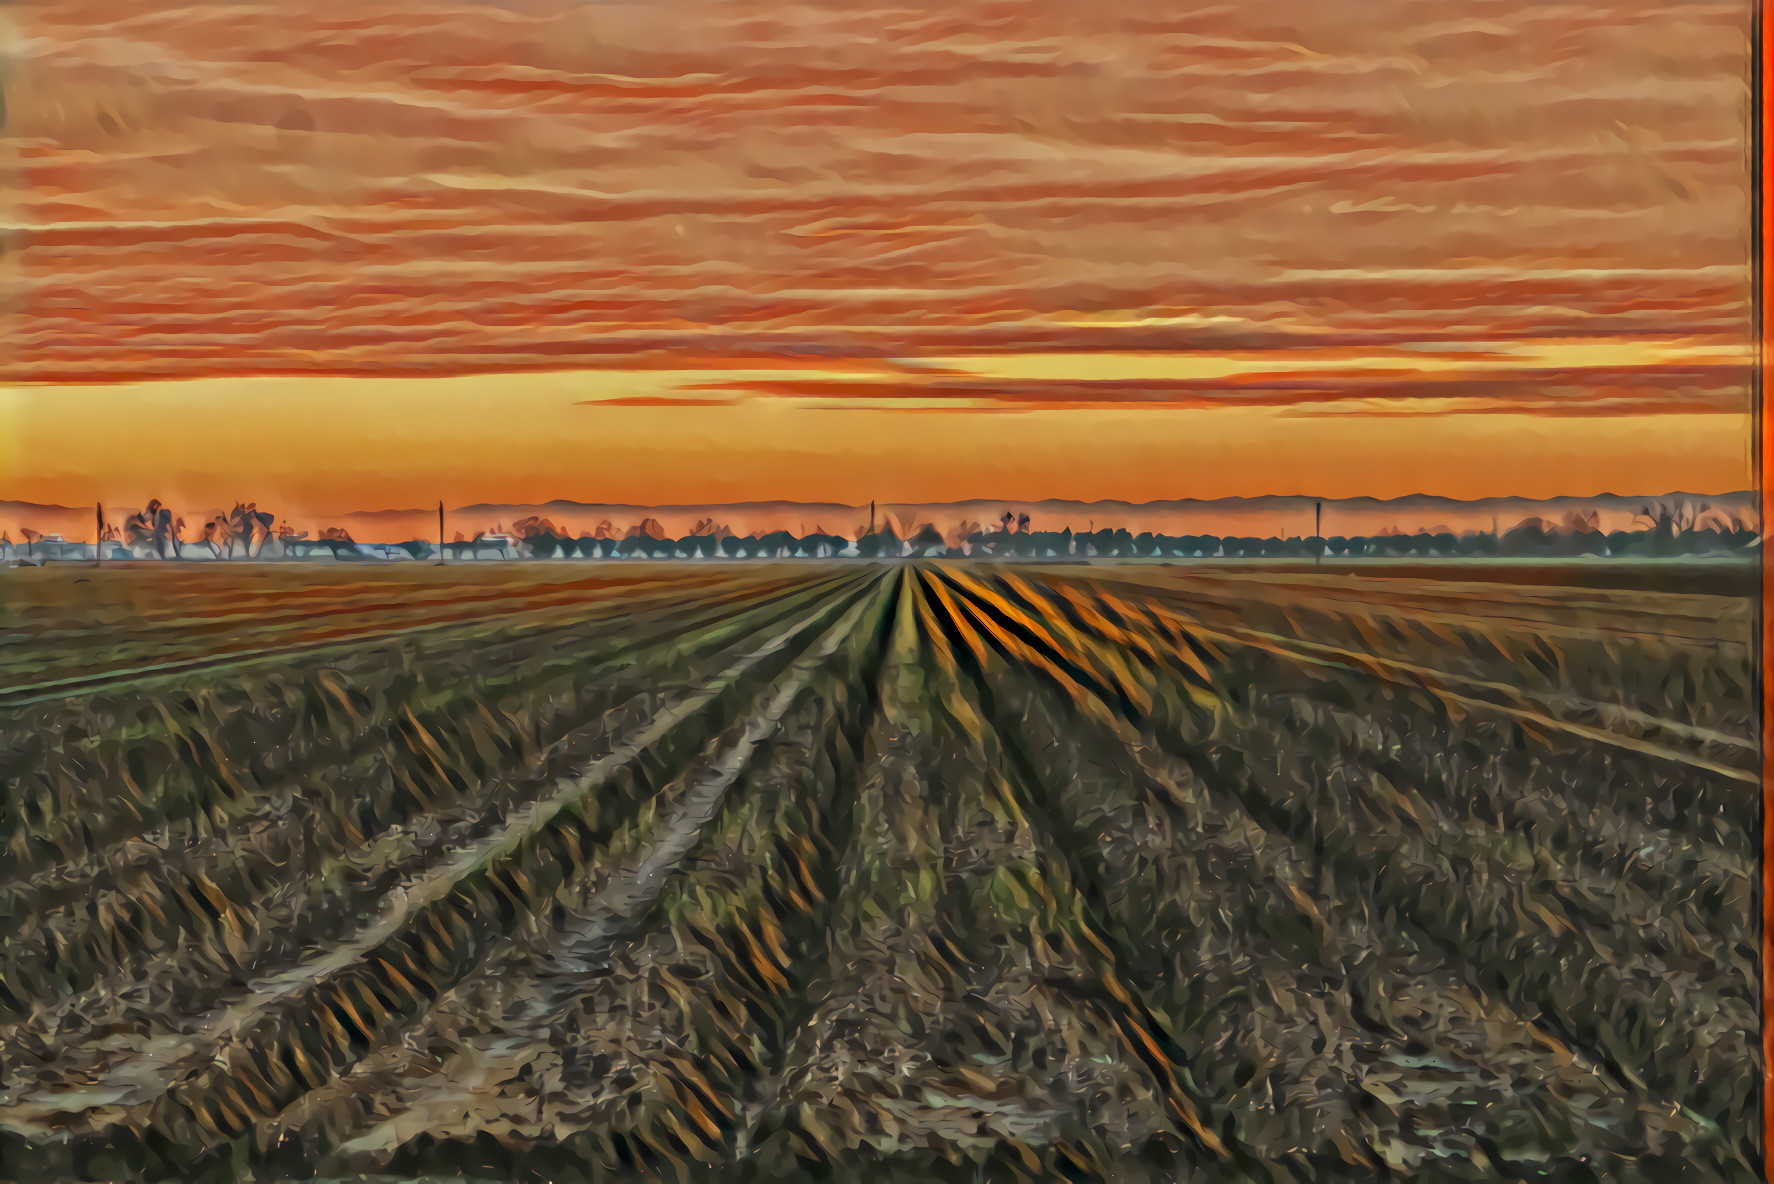 January between the coastal hills anD the Sierras is the Central Valley with its vast crop fields.  Source is my own photo.